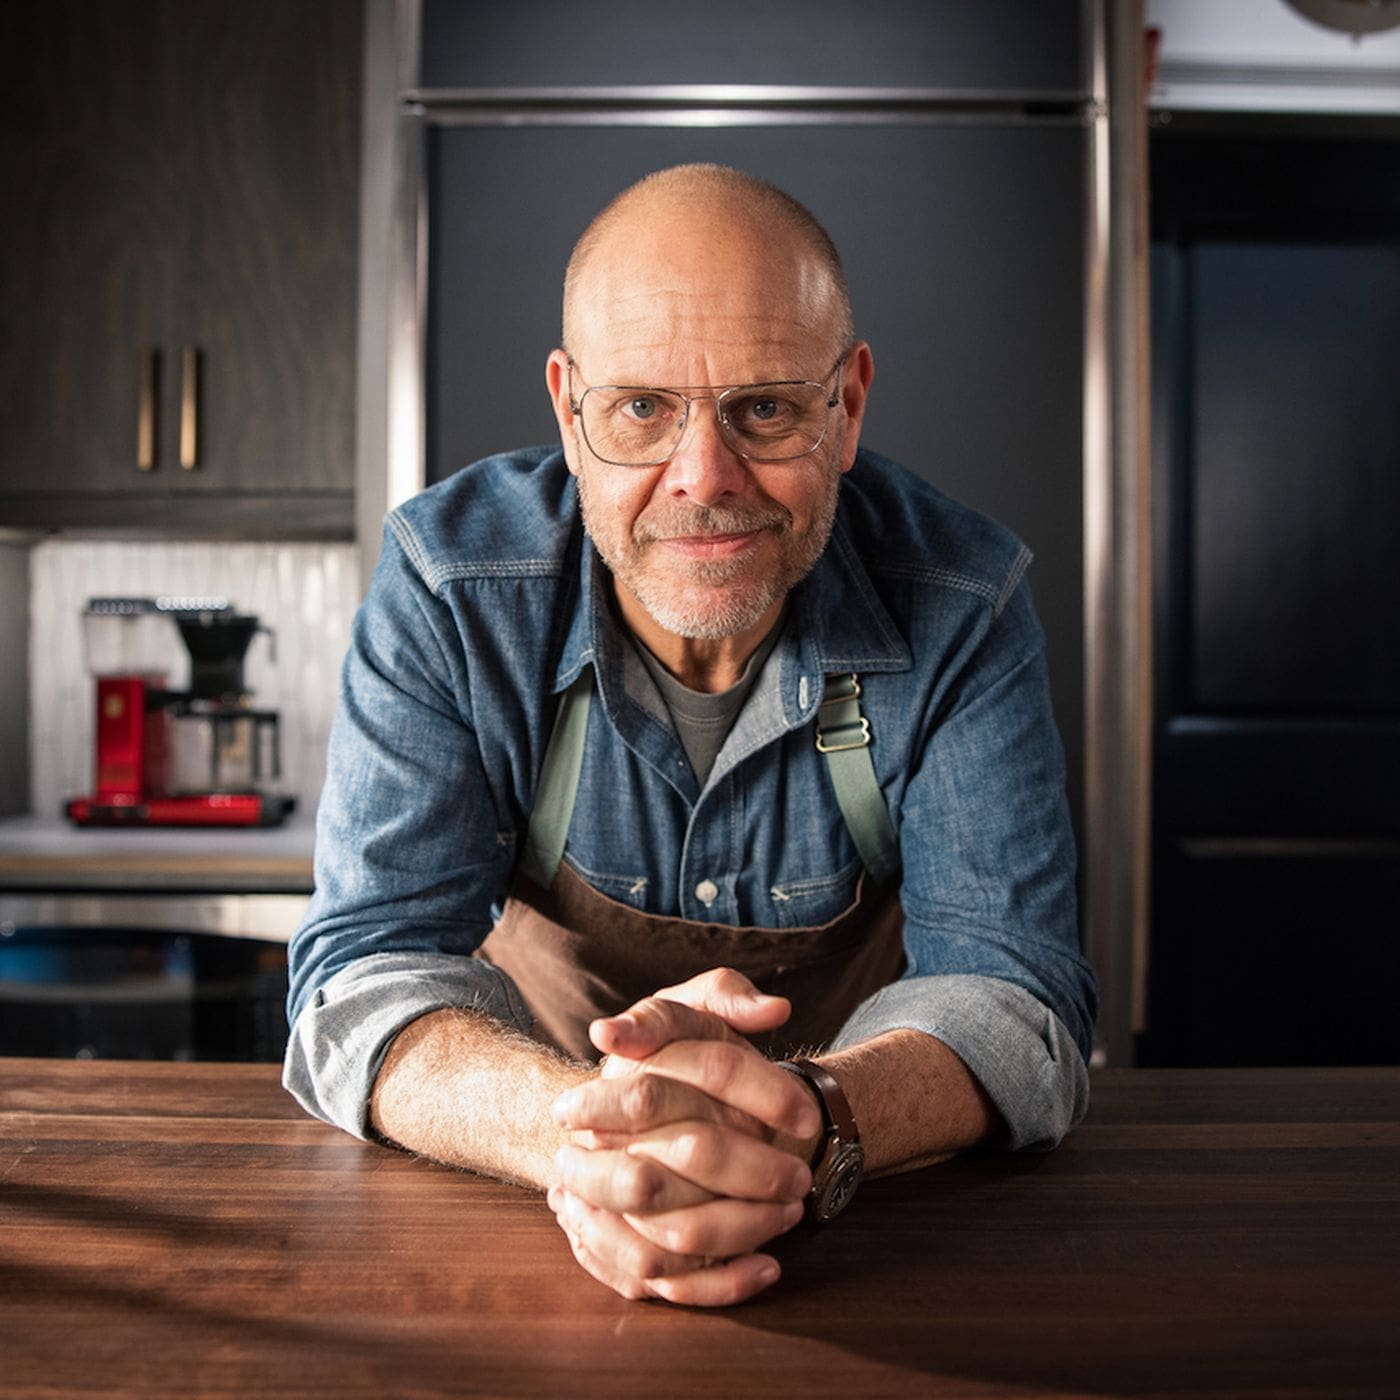 Kitchen Timers: 6 world-famous chefs with serious wrist game